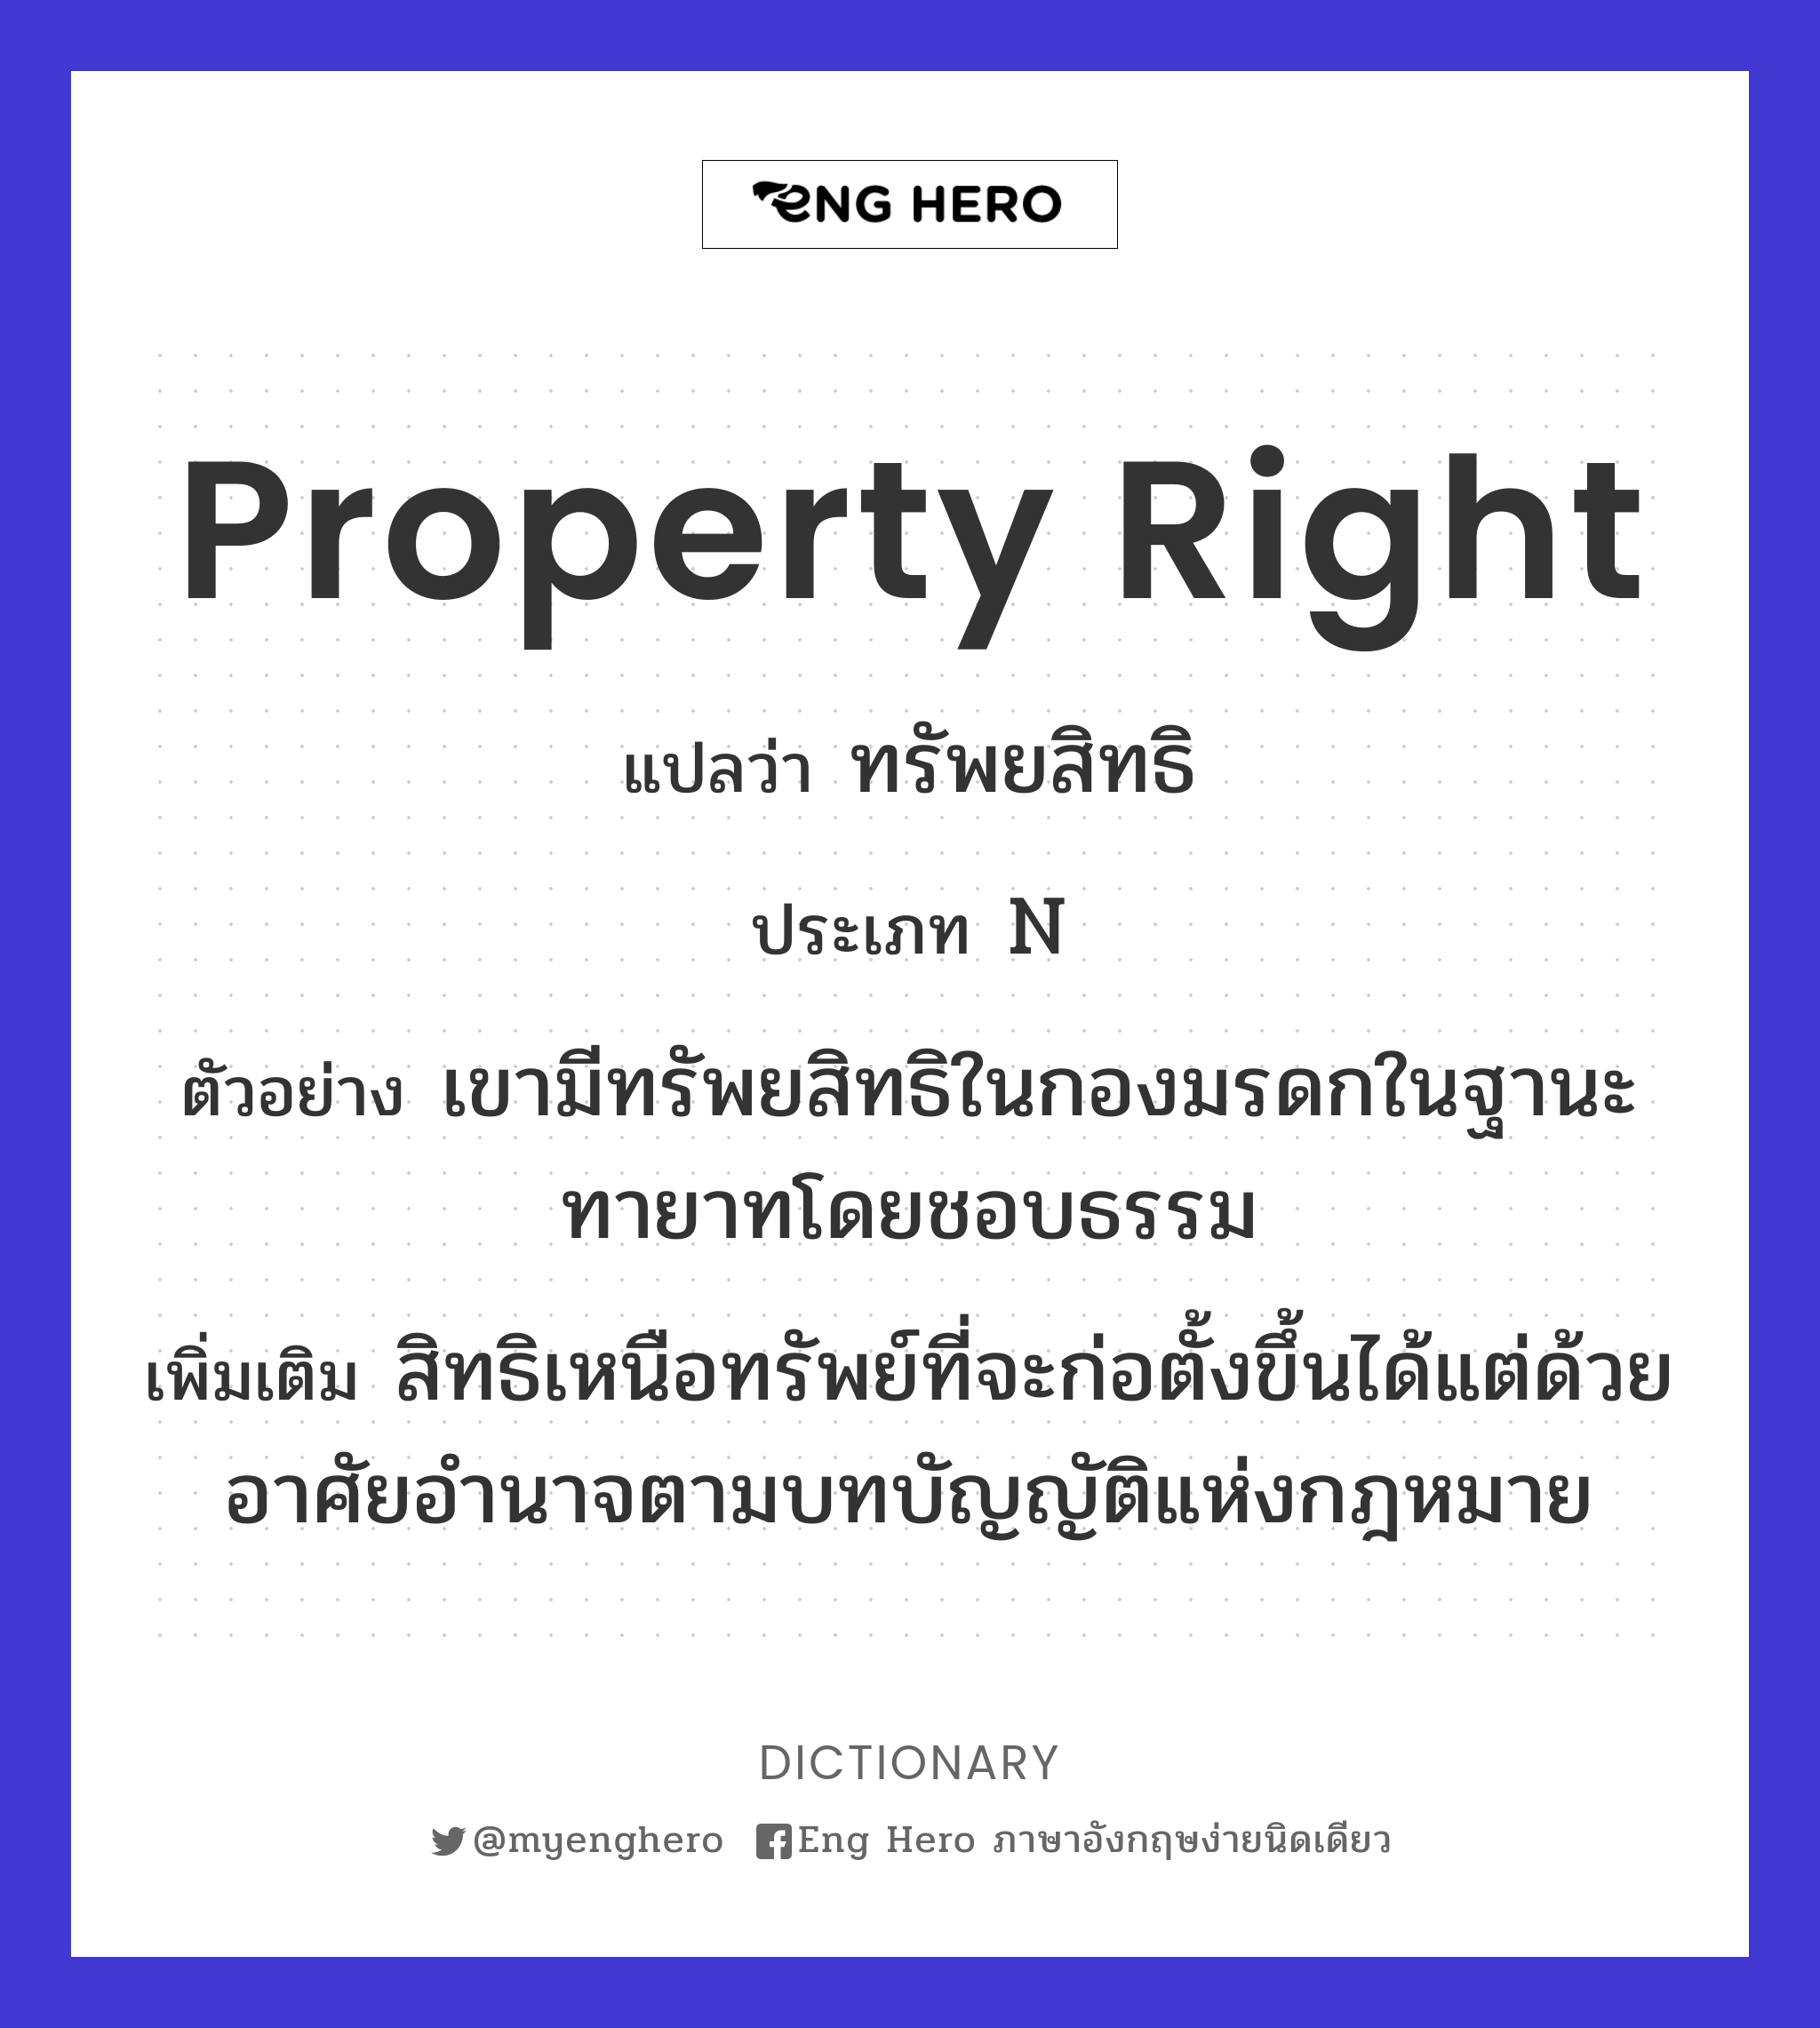 property right